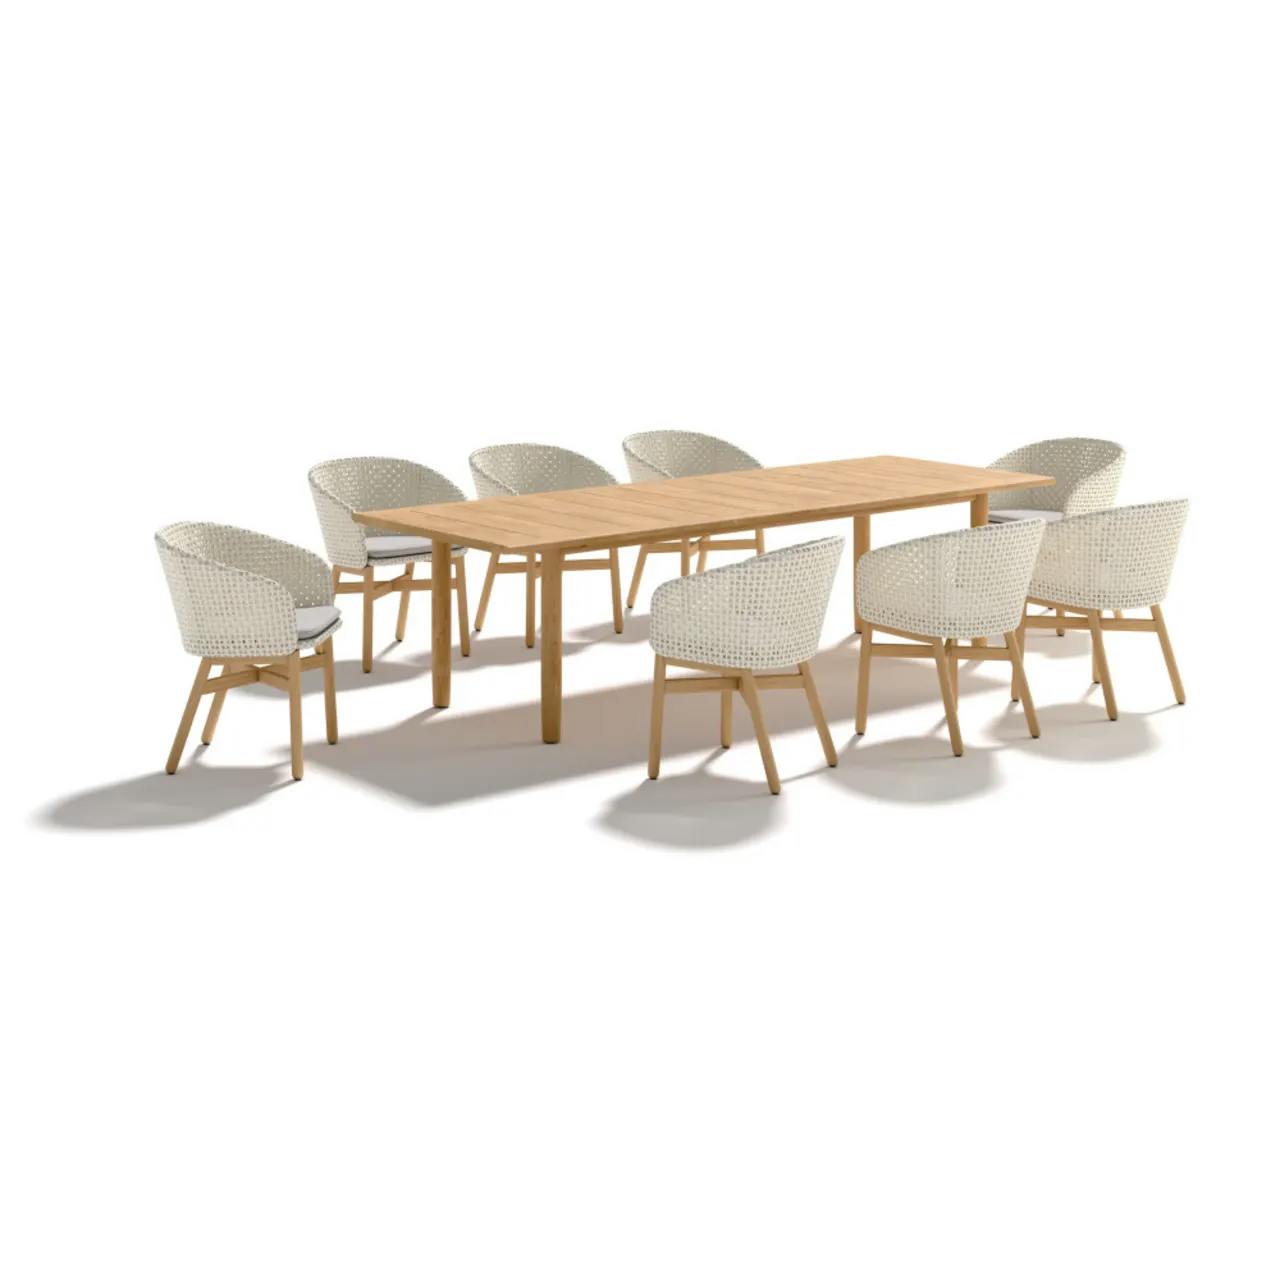 DEDON MBRACE Armchairs With Teak Legs | TIBBO 110" Dining Table